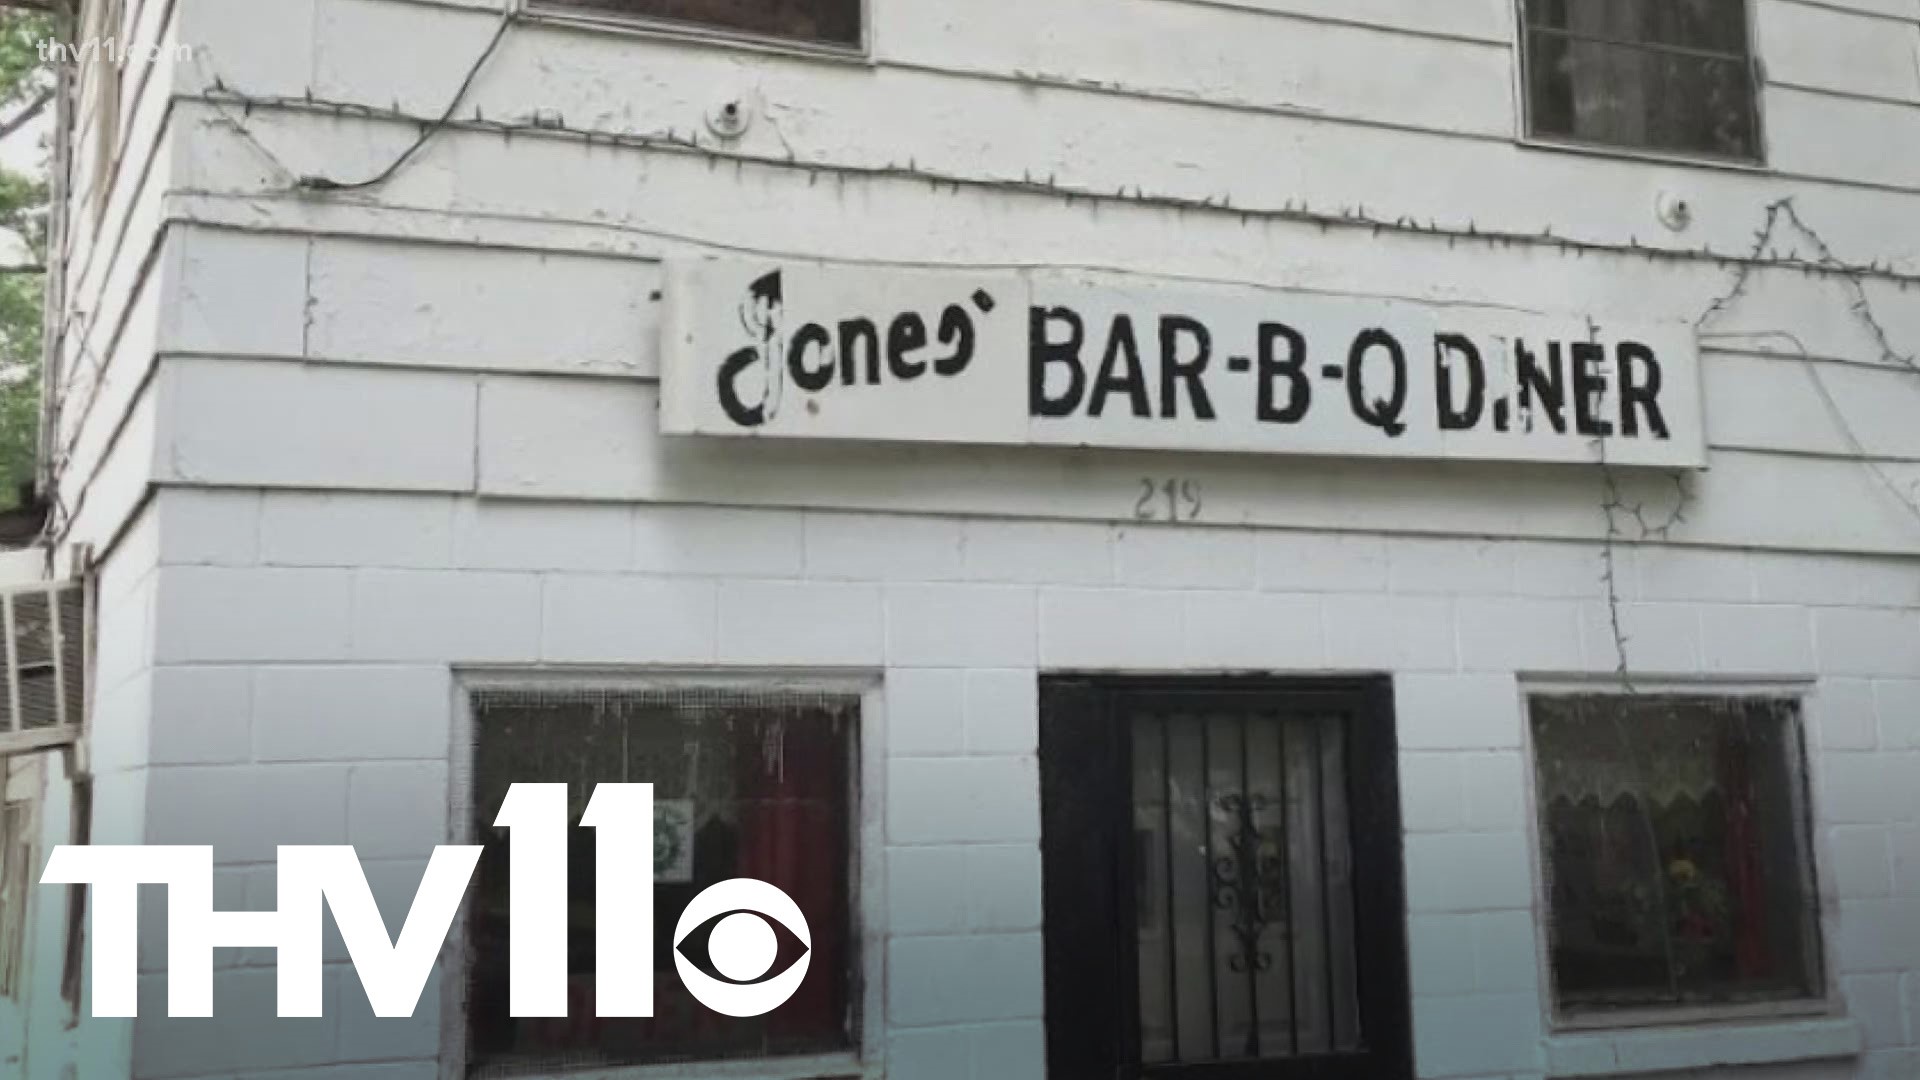 Over $67,000 was raised through a GoFundMe for Jones' Bar-B-Q. The historic business is the country's oldest Black-owned restaurant, which opened in 1910.